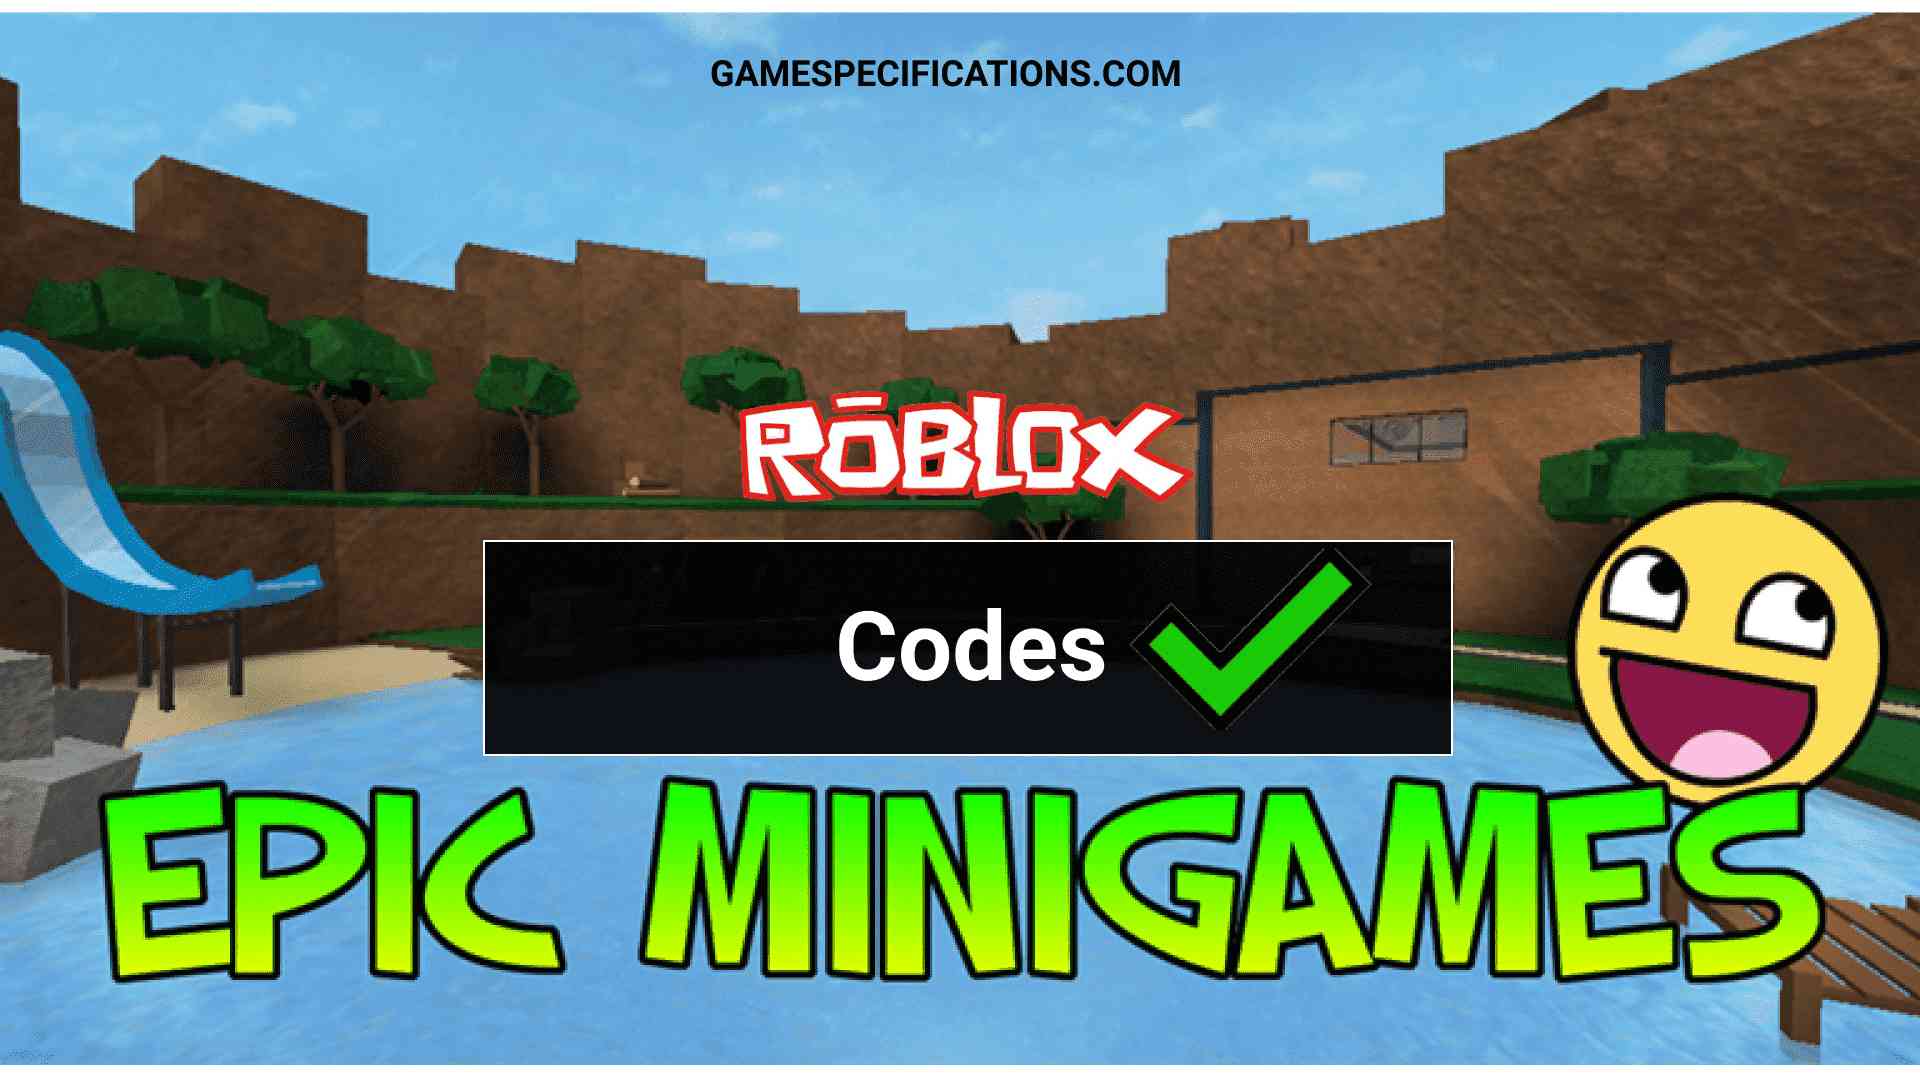 Roblox Epic Minigames Codes To Get Free Items July 2021 Game Specifications - how to make a mini game roblox